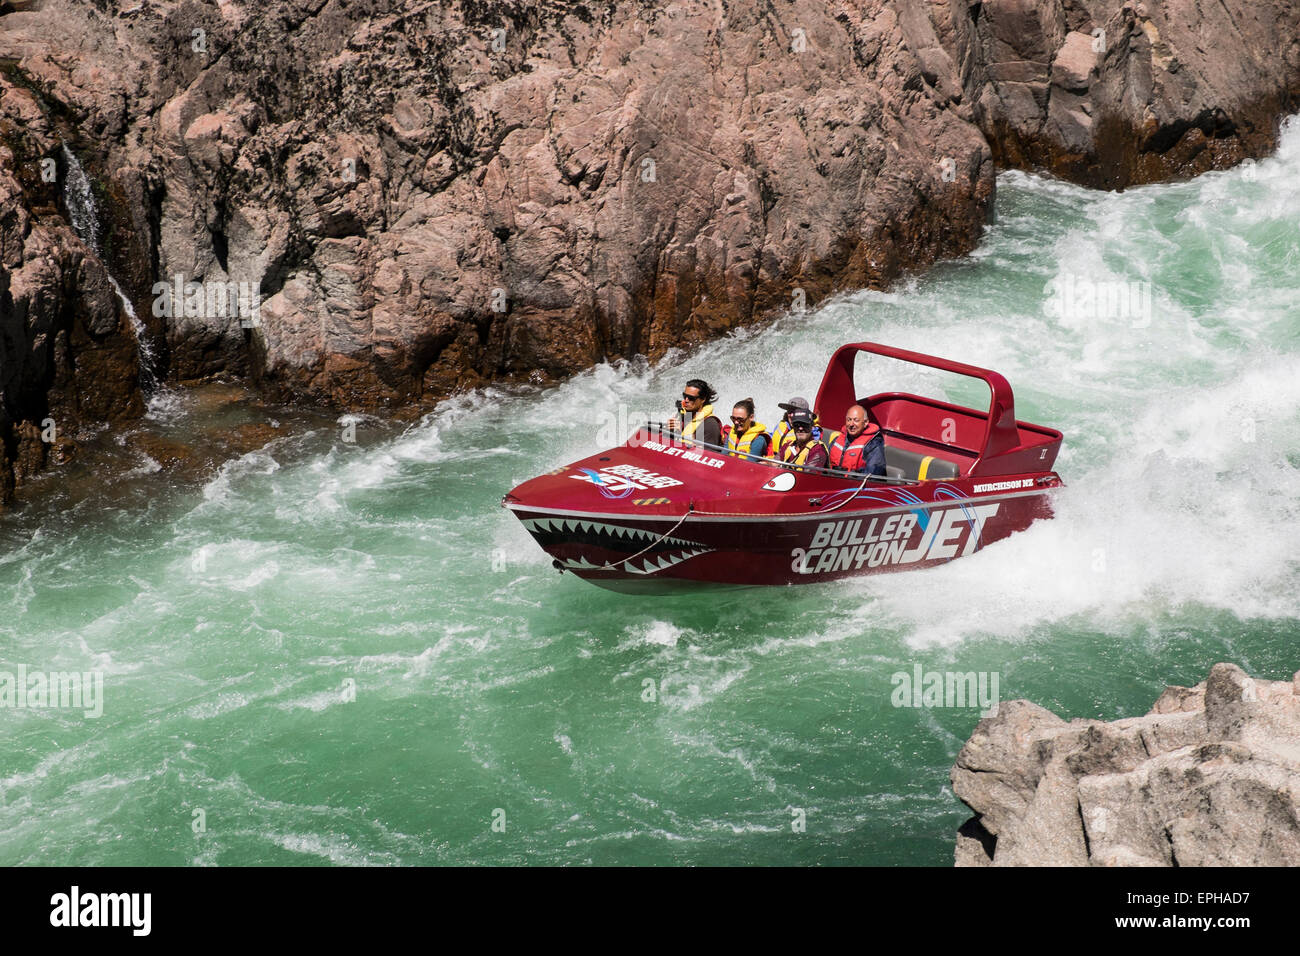 Buller Canyon Jet boat with tourists on a thrilling ride through a rocky ravine on the river, Murchison, New Zealand. Stock Photo